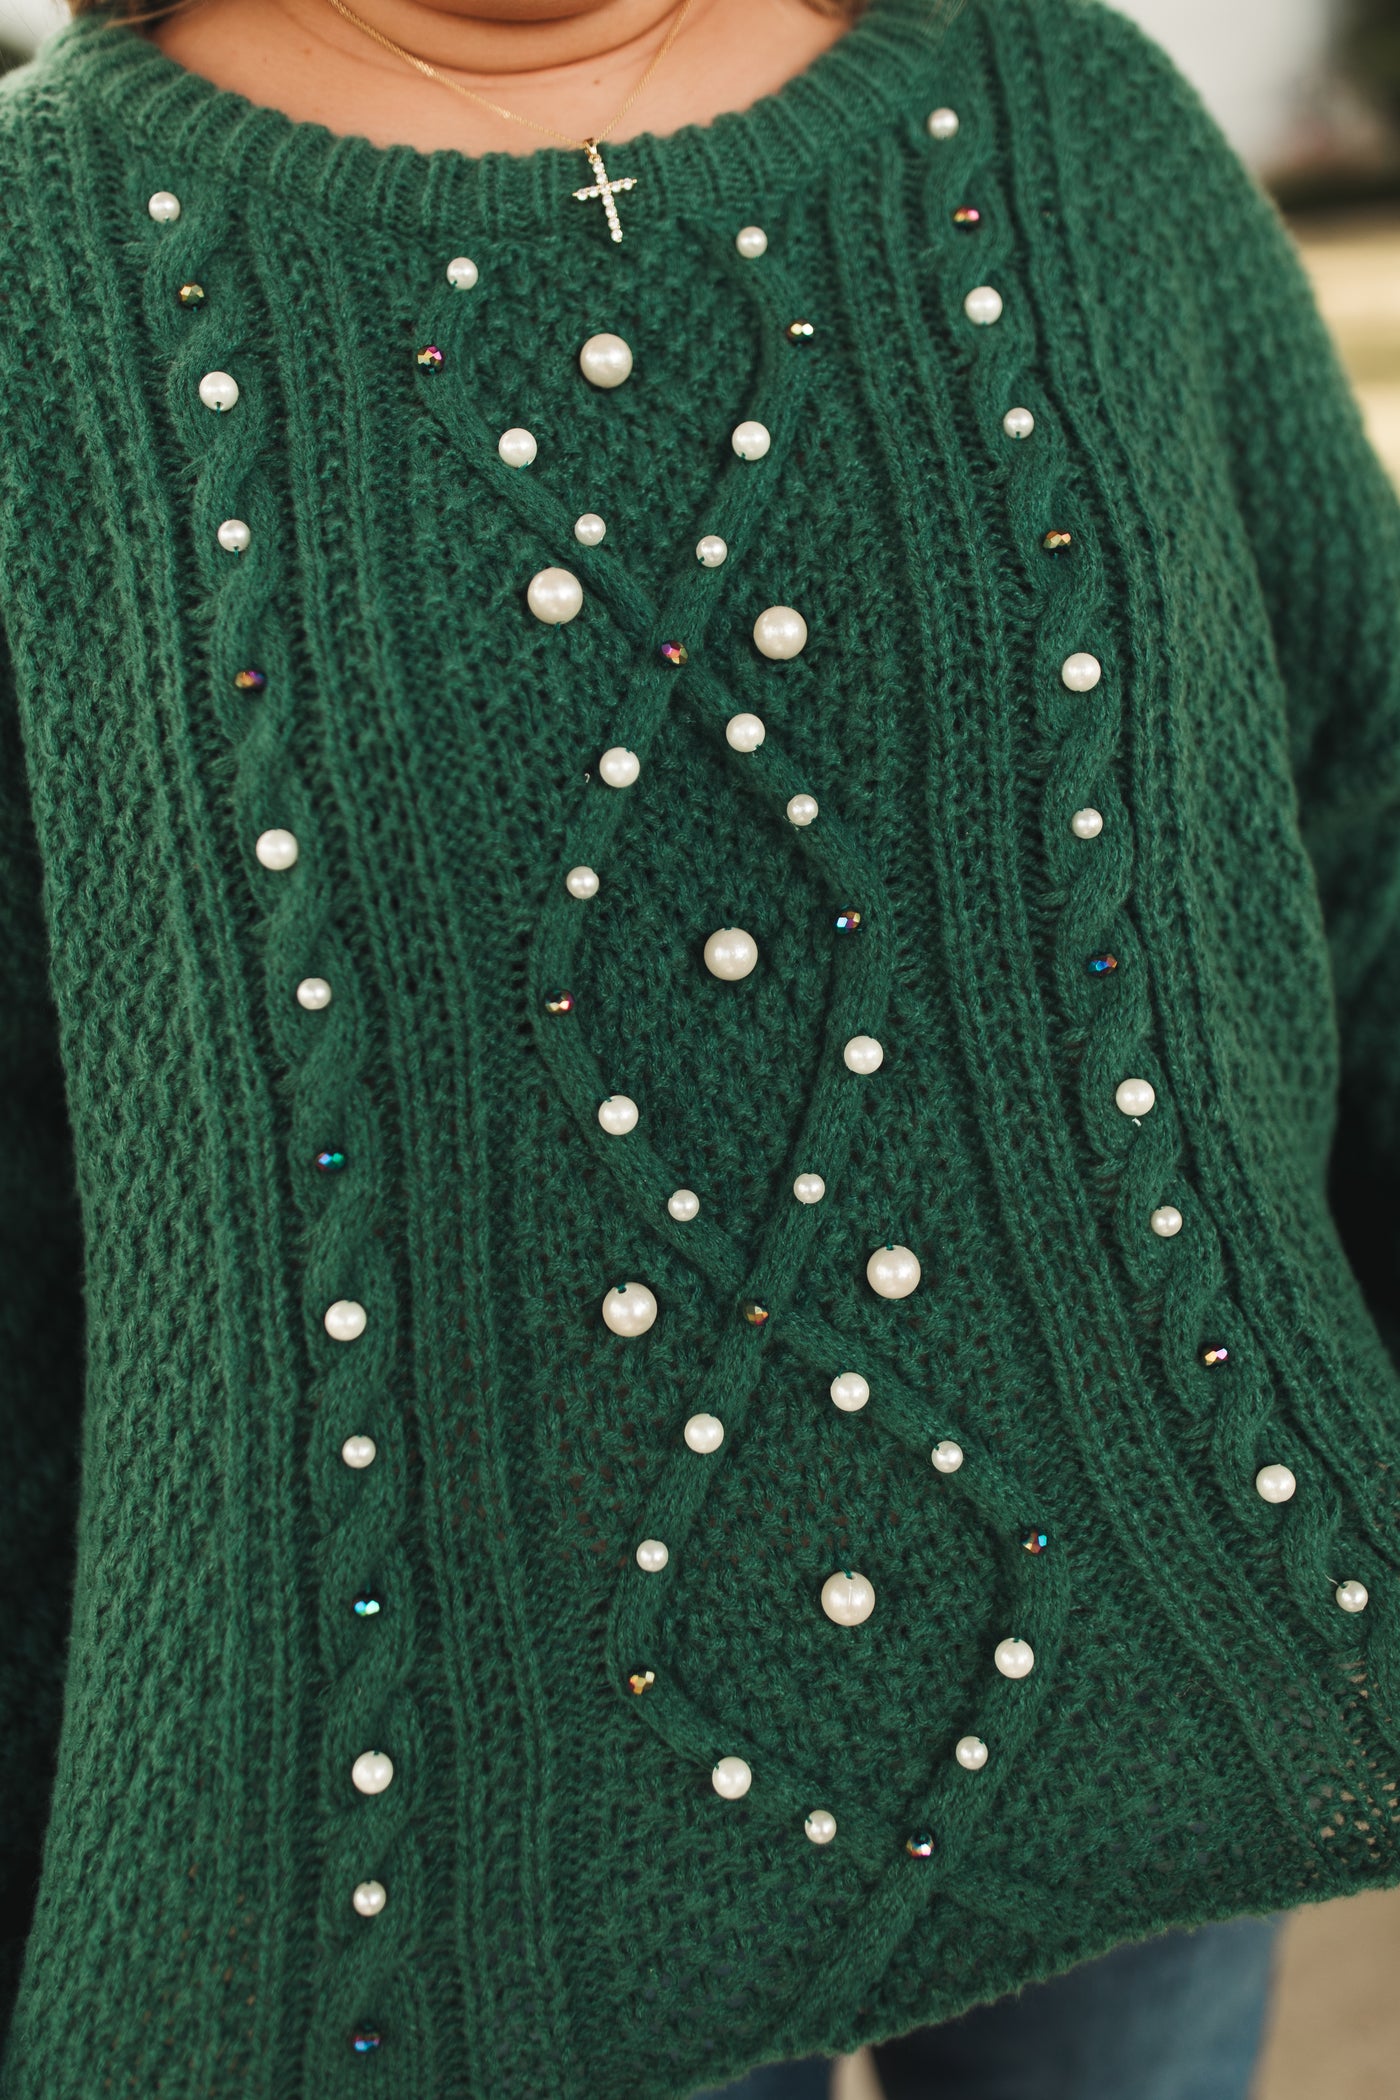 Hunter Pearl Beaded Cable Knit Sweater